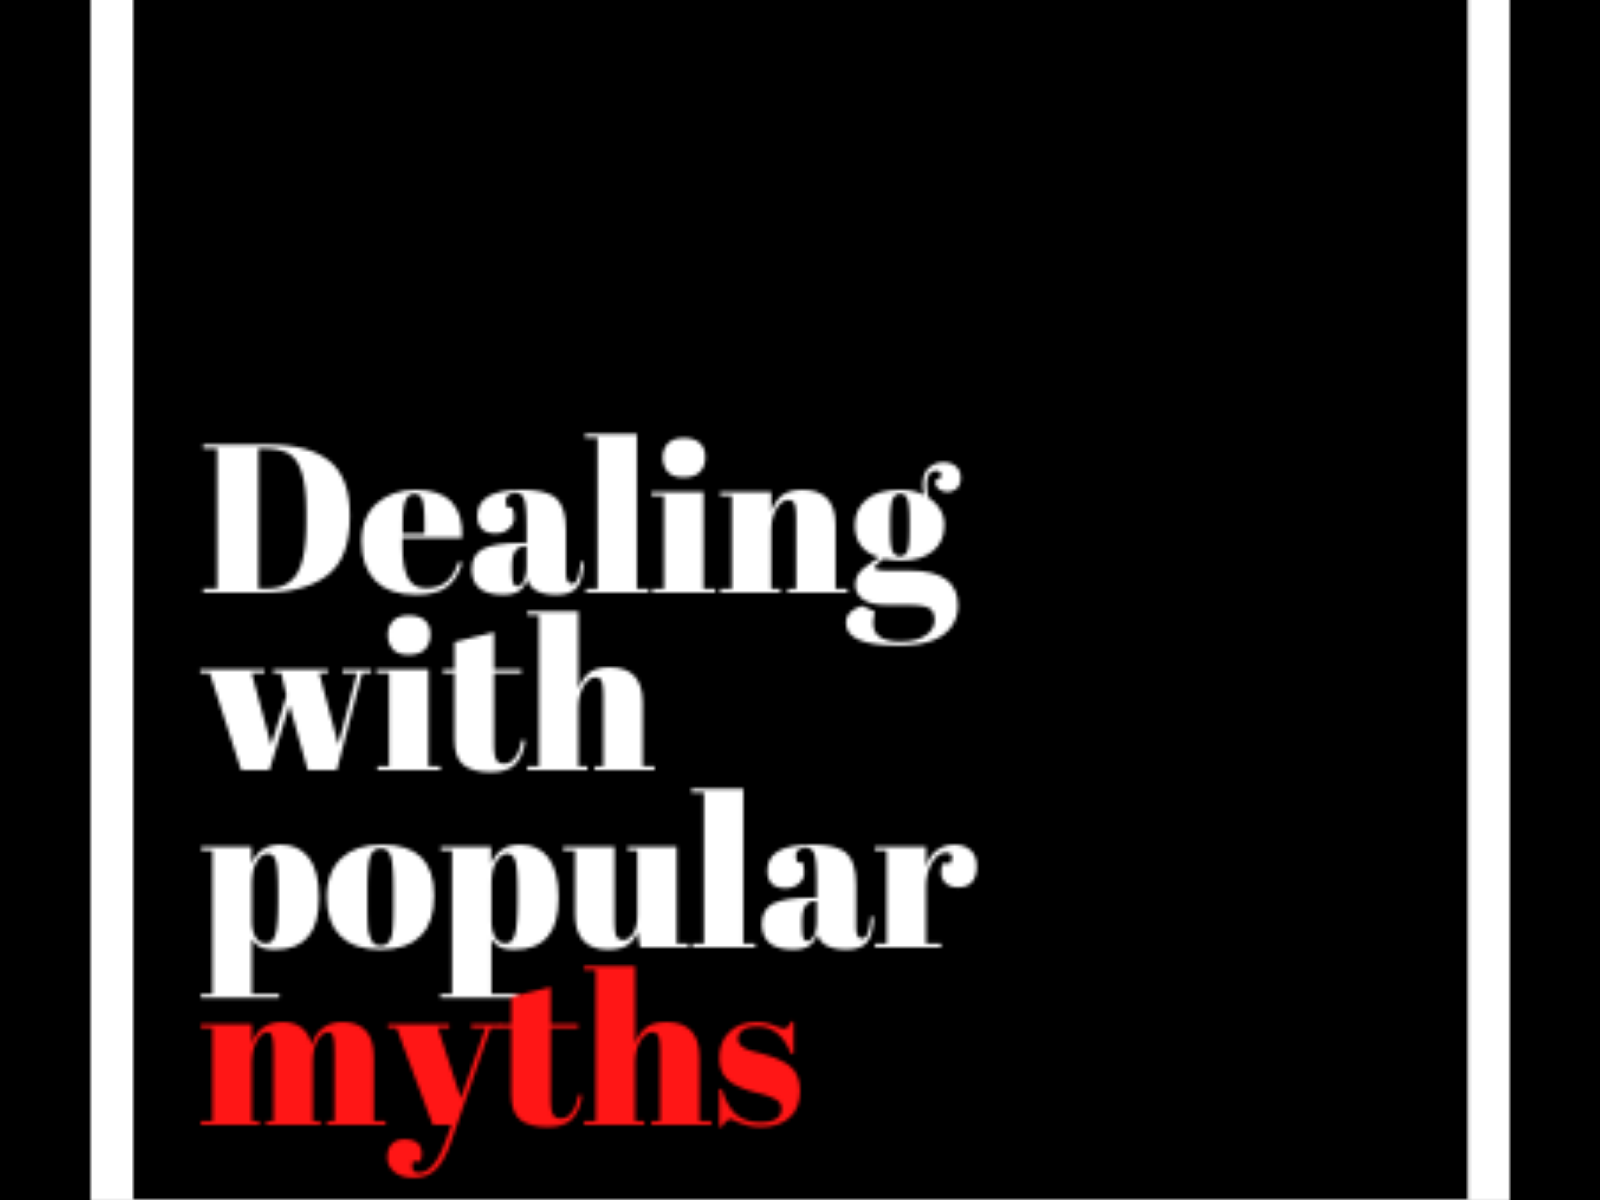 Dealing with popular myths.png